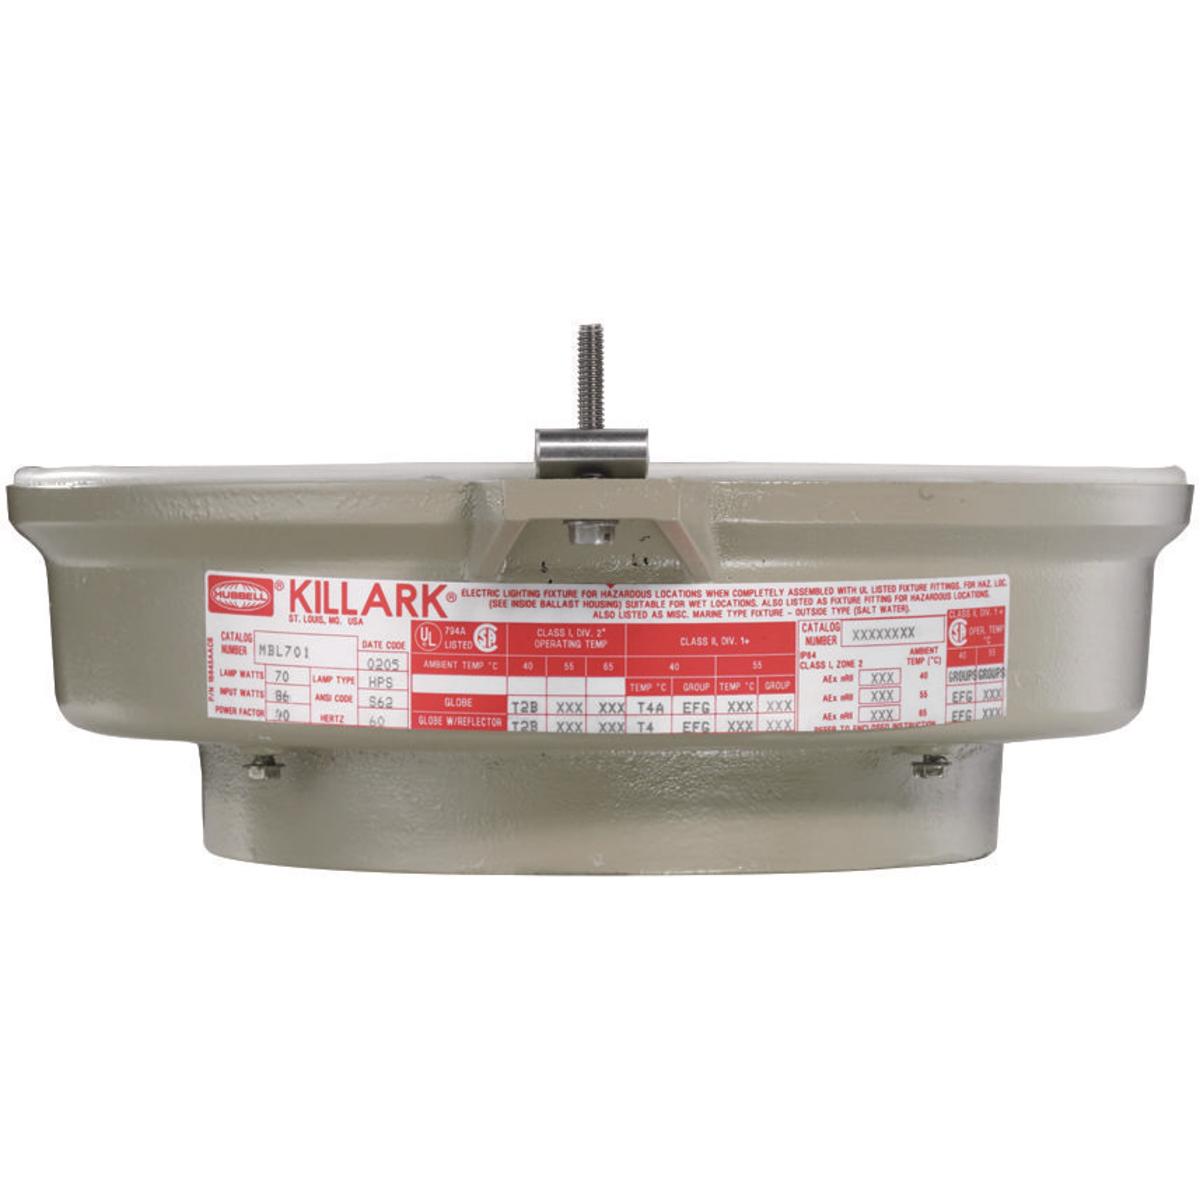 Hubbell VM2H050 VM2 Series - 50W Metal Halide Quadri-Volt - Housing  ; The VM2 Series is a low profile, low bay HID luminaire. The design of the VM2 makes it suitable for harsh and hazardous environments using a cast copper-free aluminum housing and mount. Its low profil